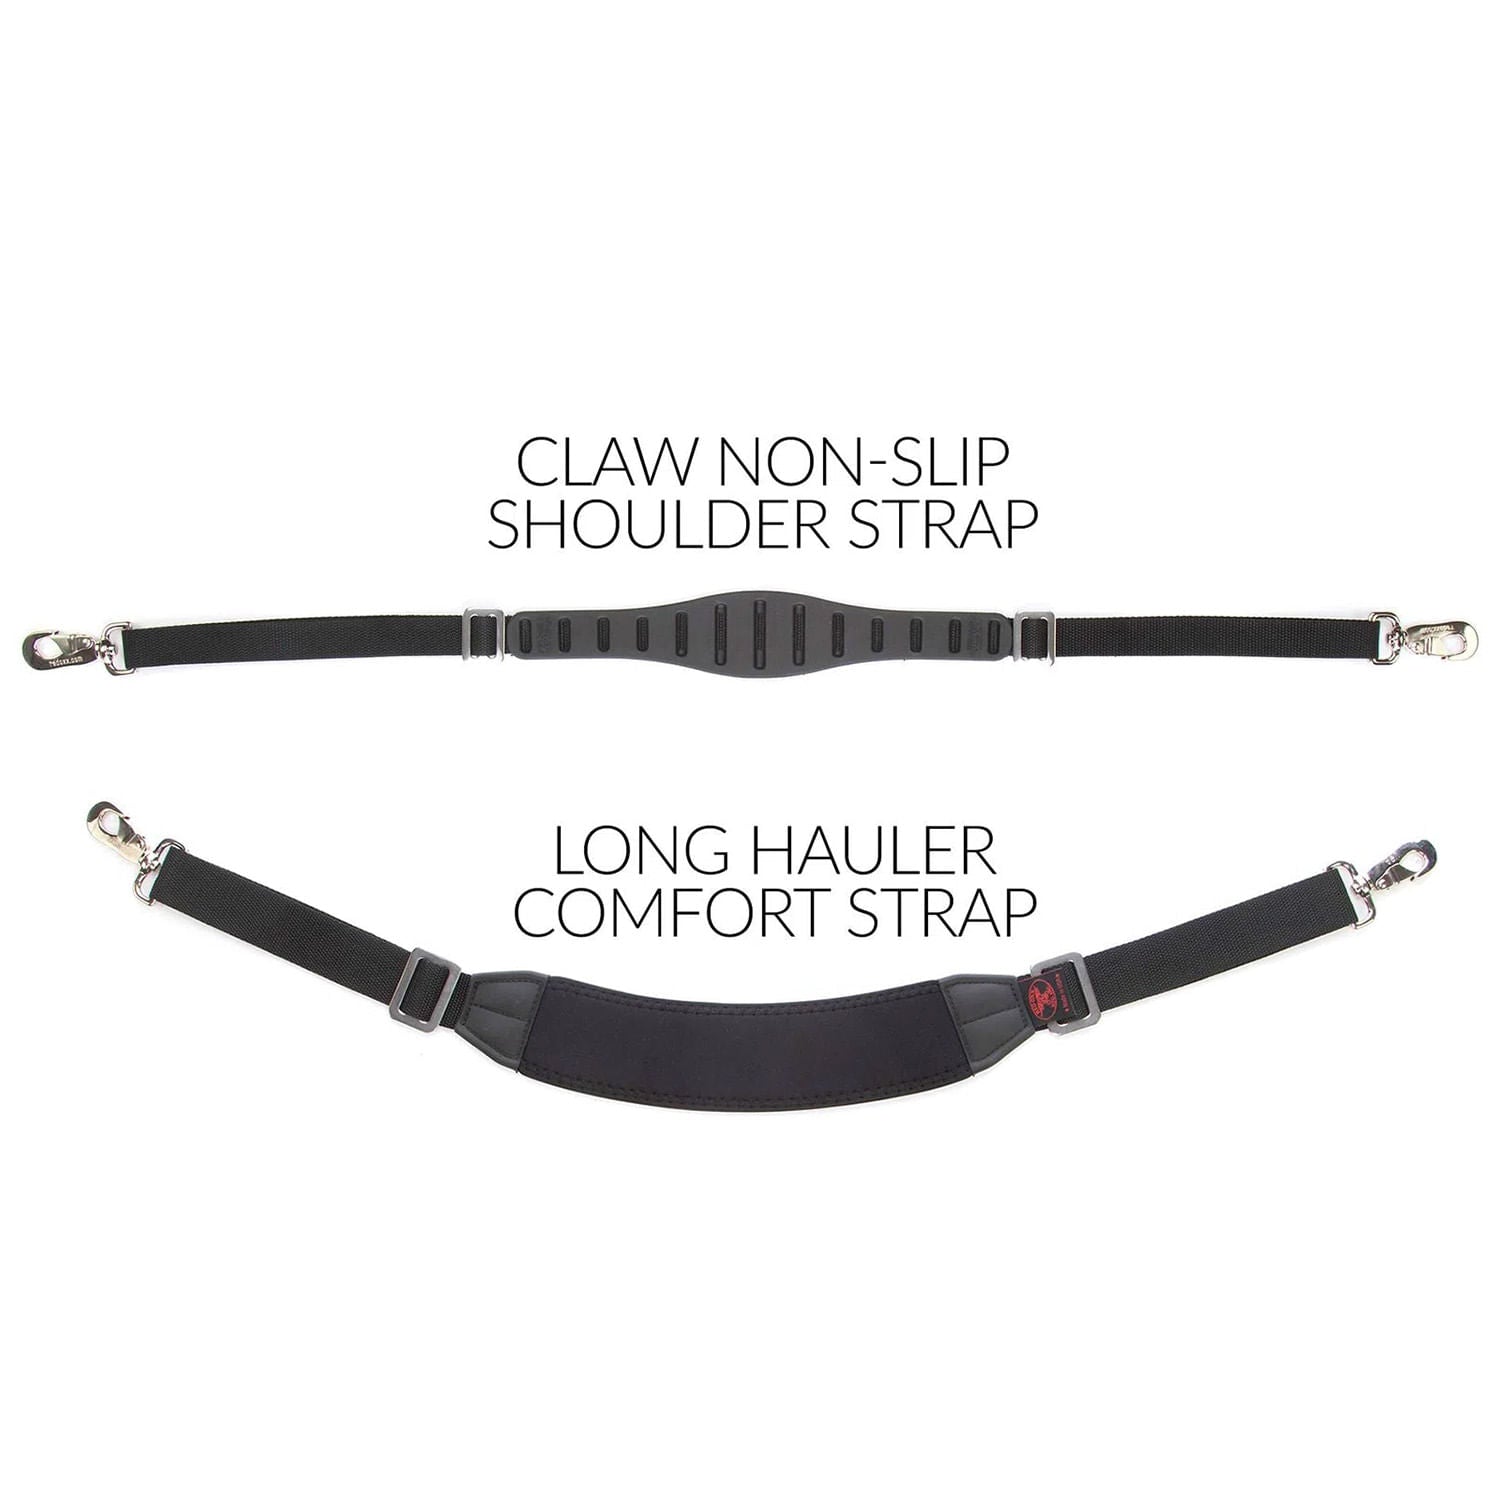 Non-slip Replacement Shoulder Strap - The Claw - Red Oxx Mfg